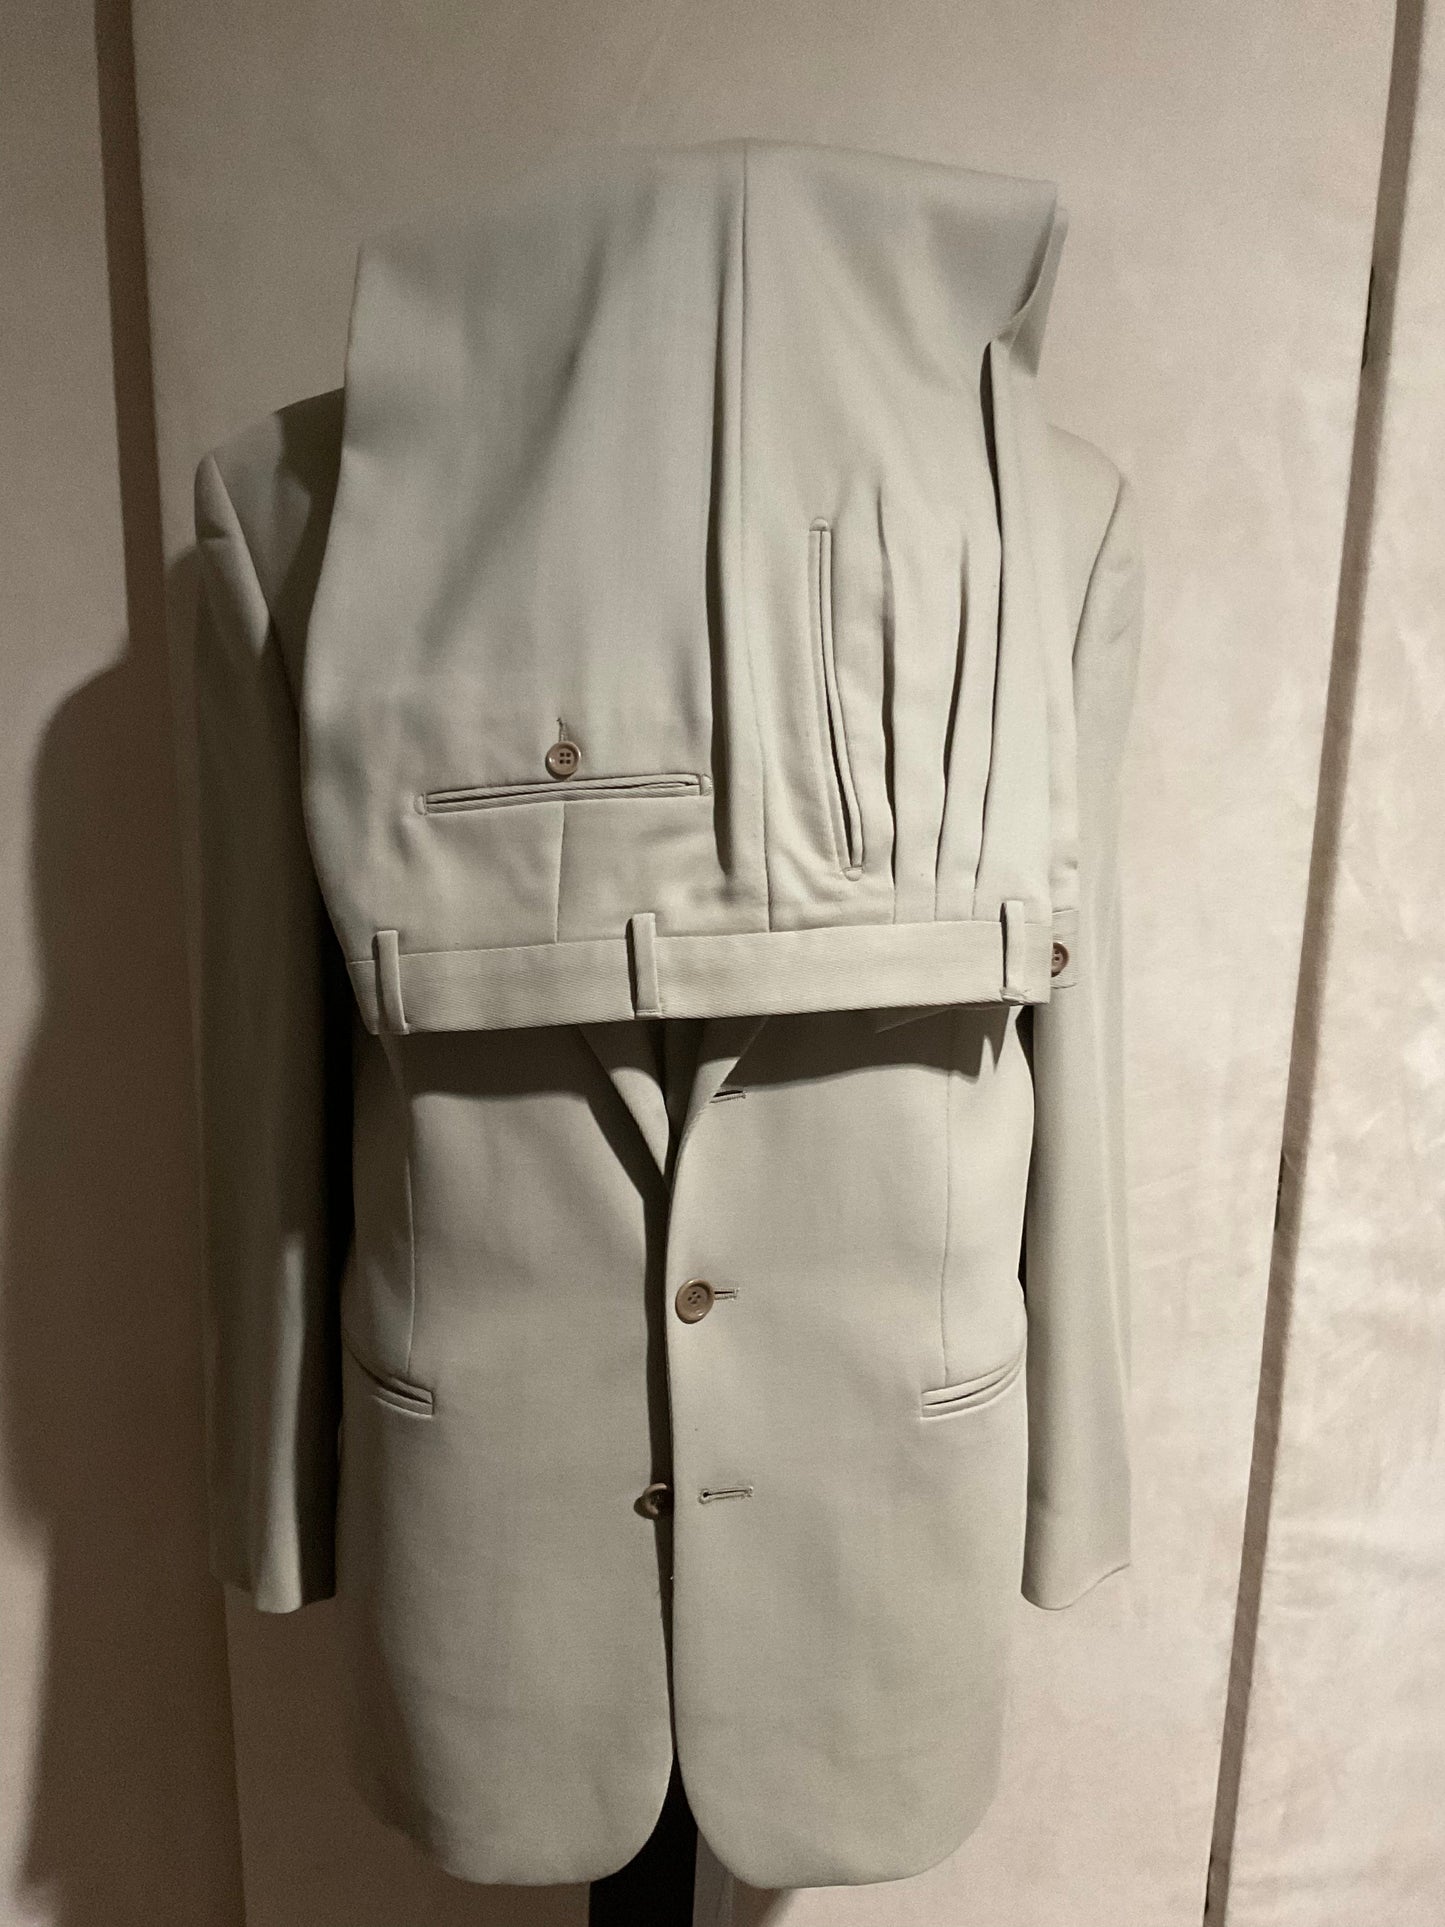 R P SUIT / TAN BEIGE / 3 PIECE VESTED / 40 REG / MADE IN ITALY